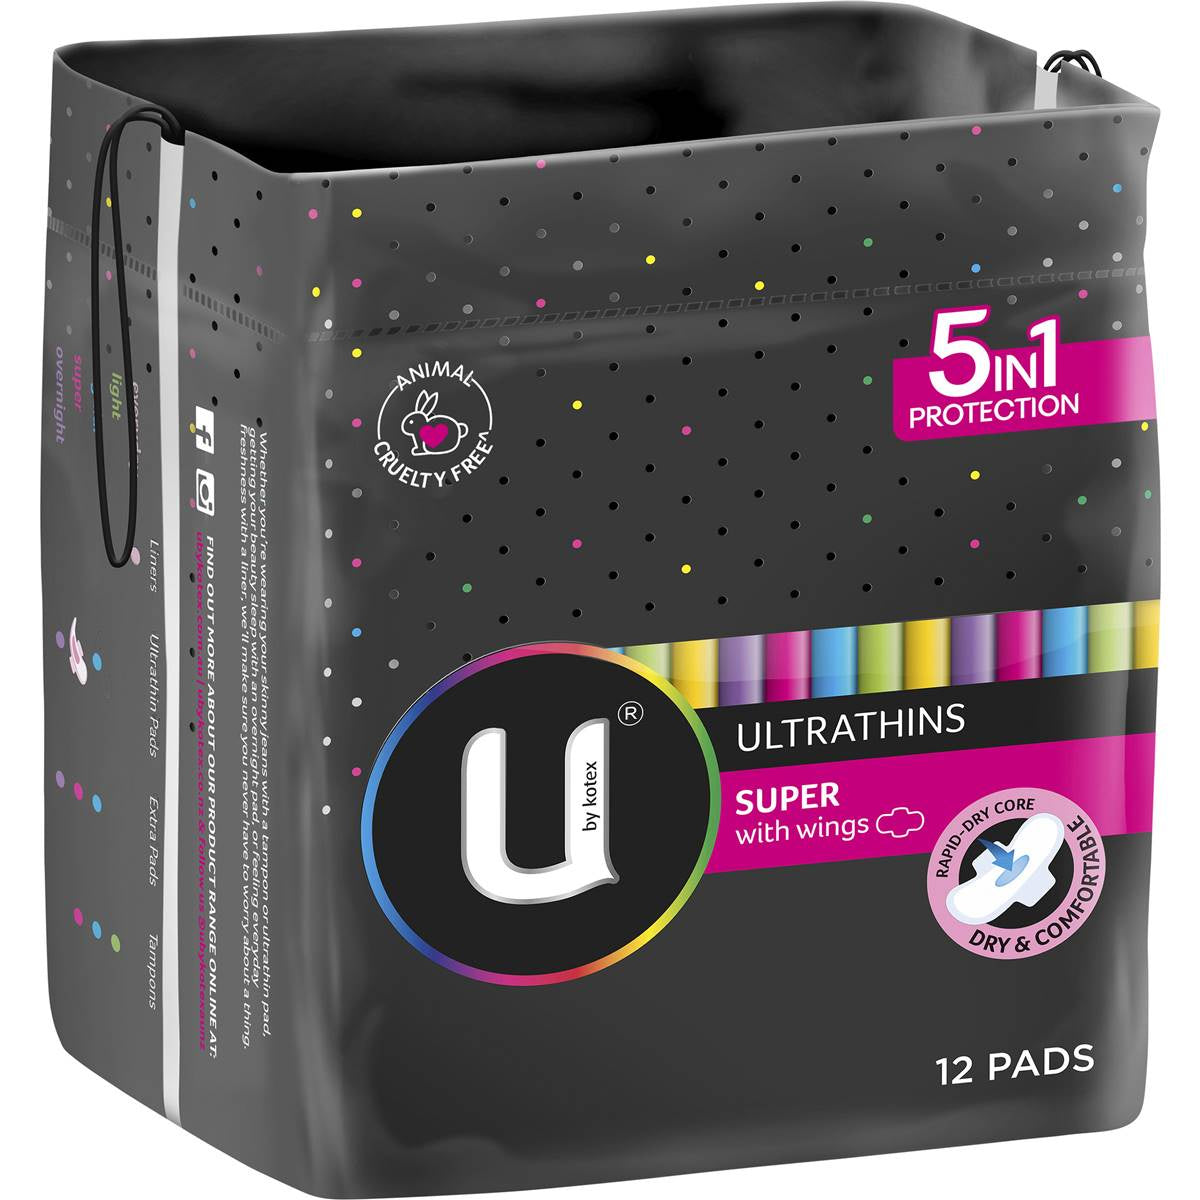 U by Kotex Pads Ultrathin Super with Wings 12pk